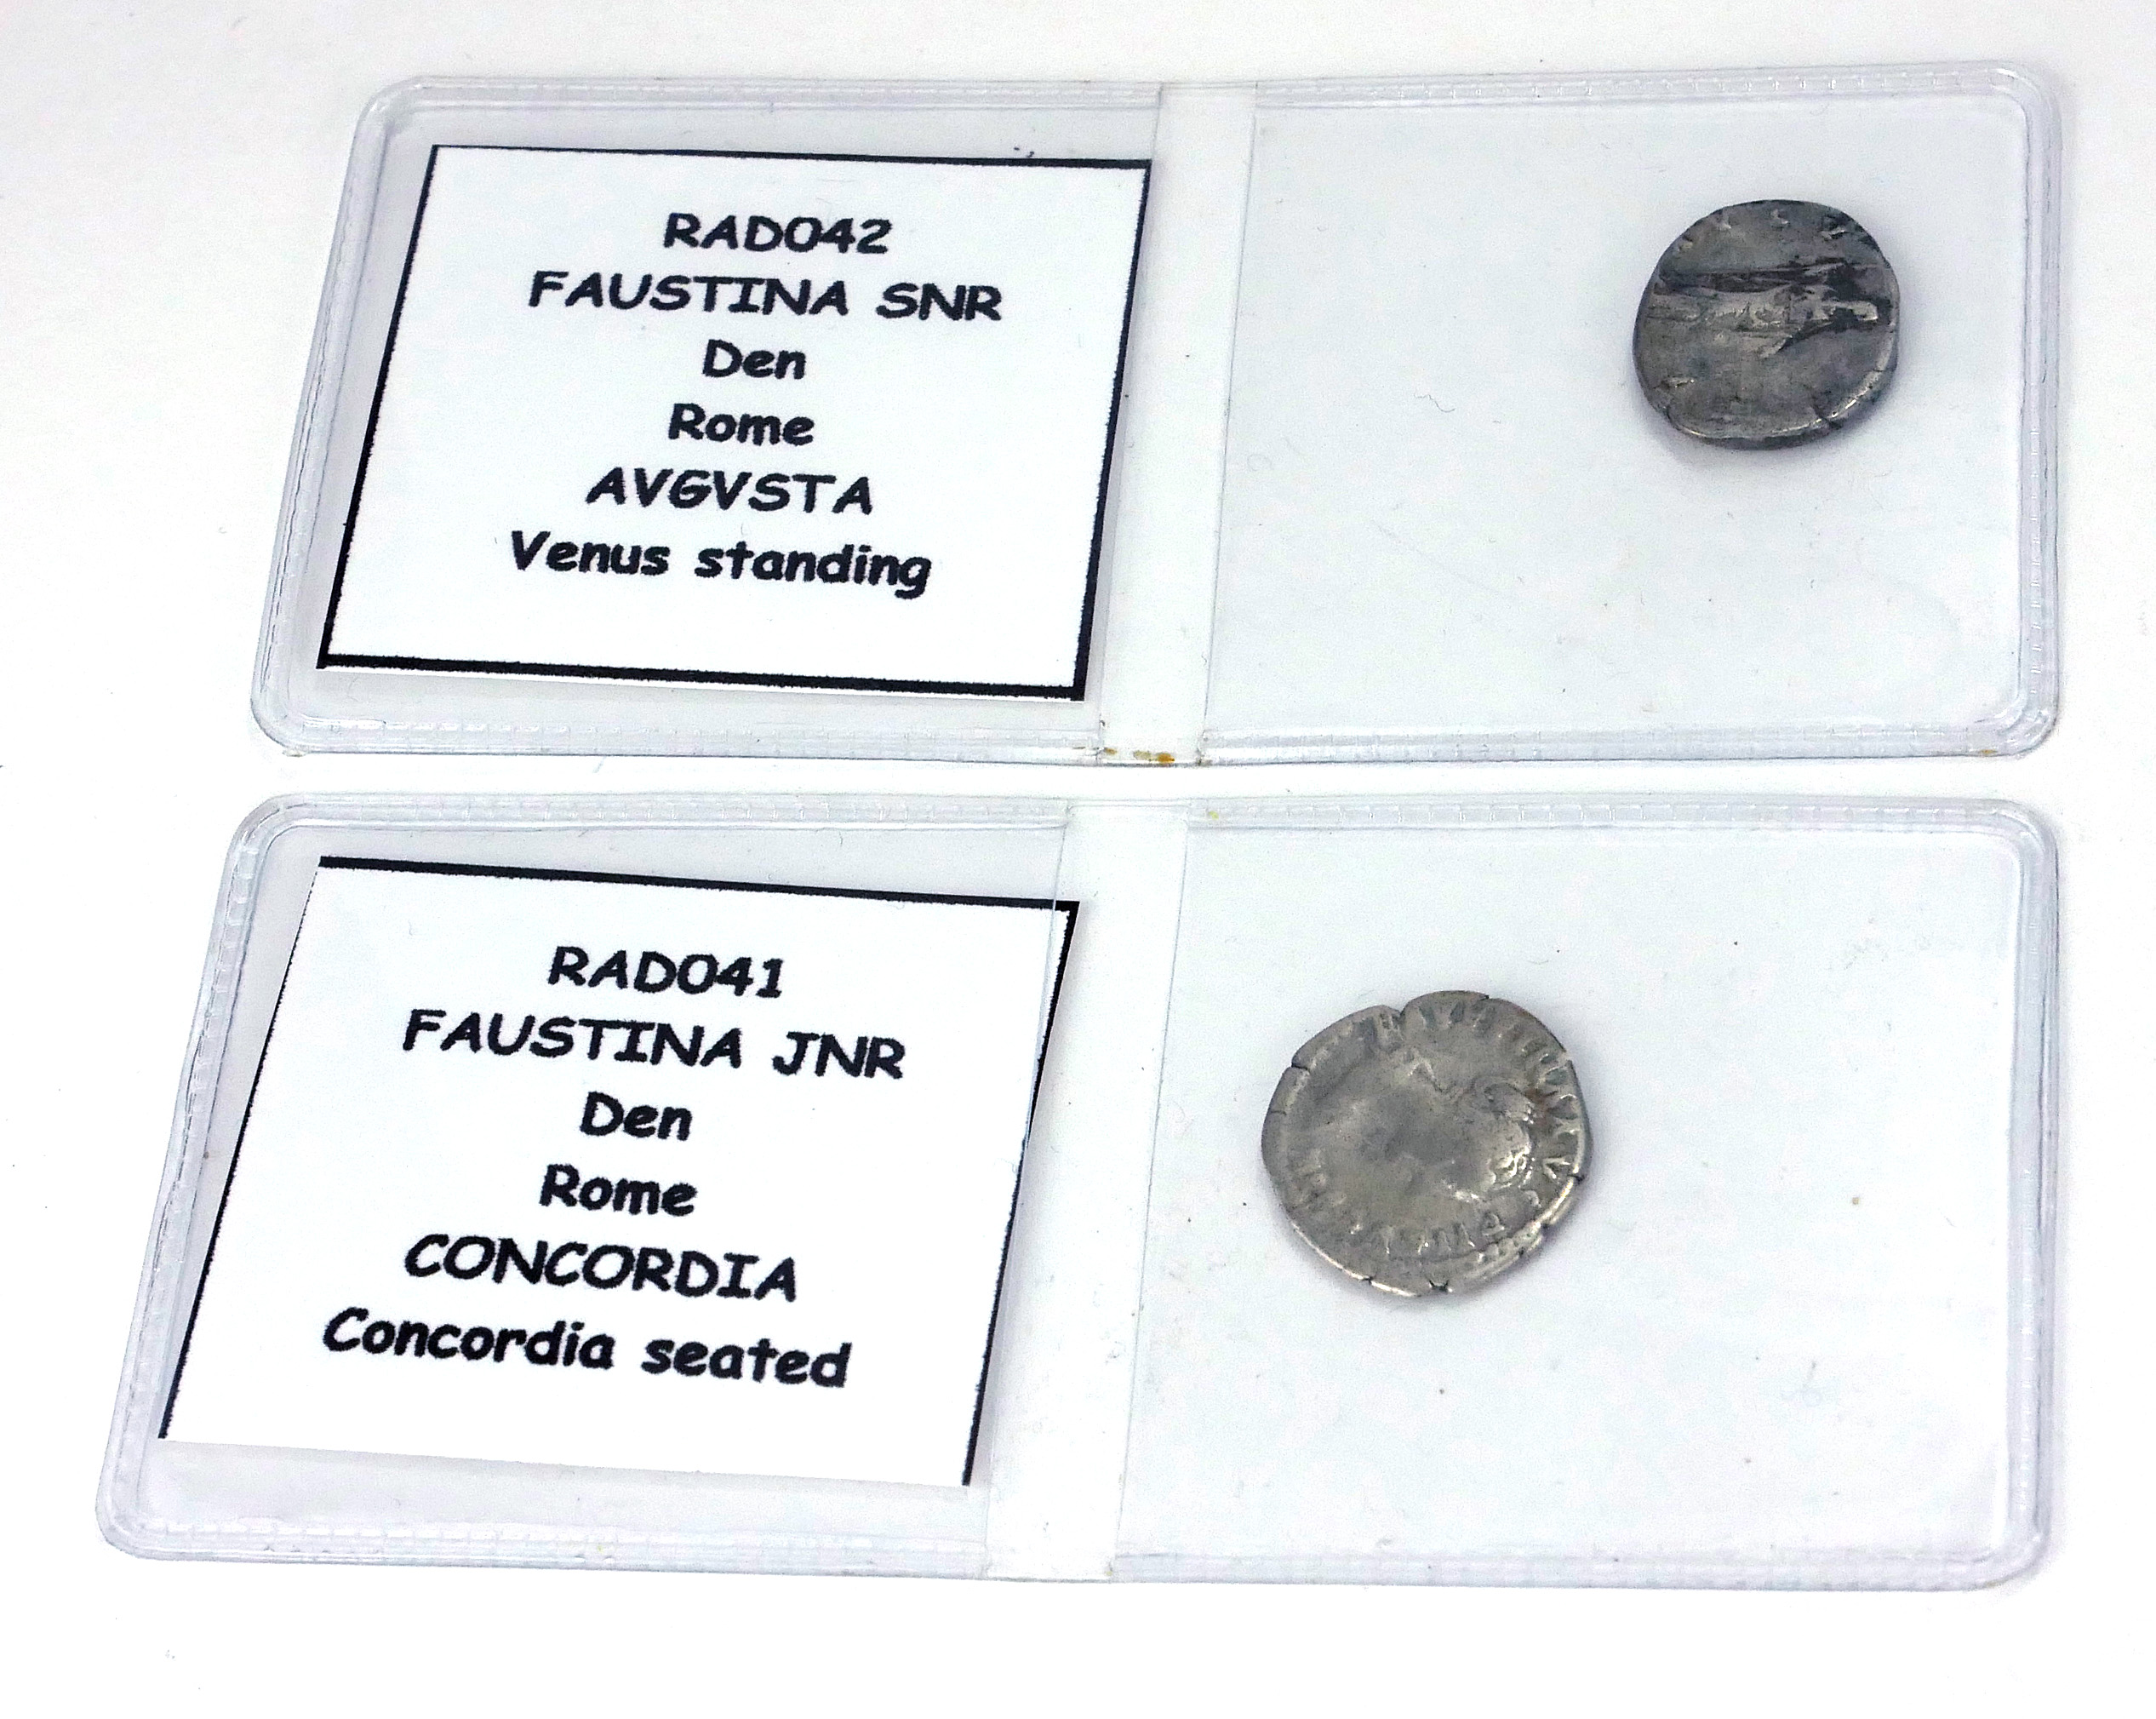 FAUSTINA, 161 - 175AD, TWO ROMAN SILVER COINS Faustina SNR with Venus standing and Faustina JNR with